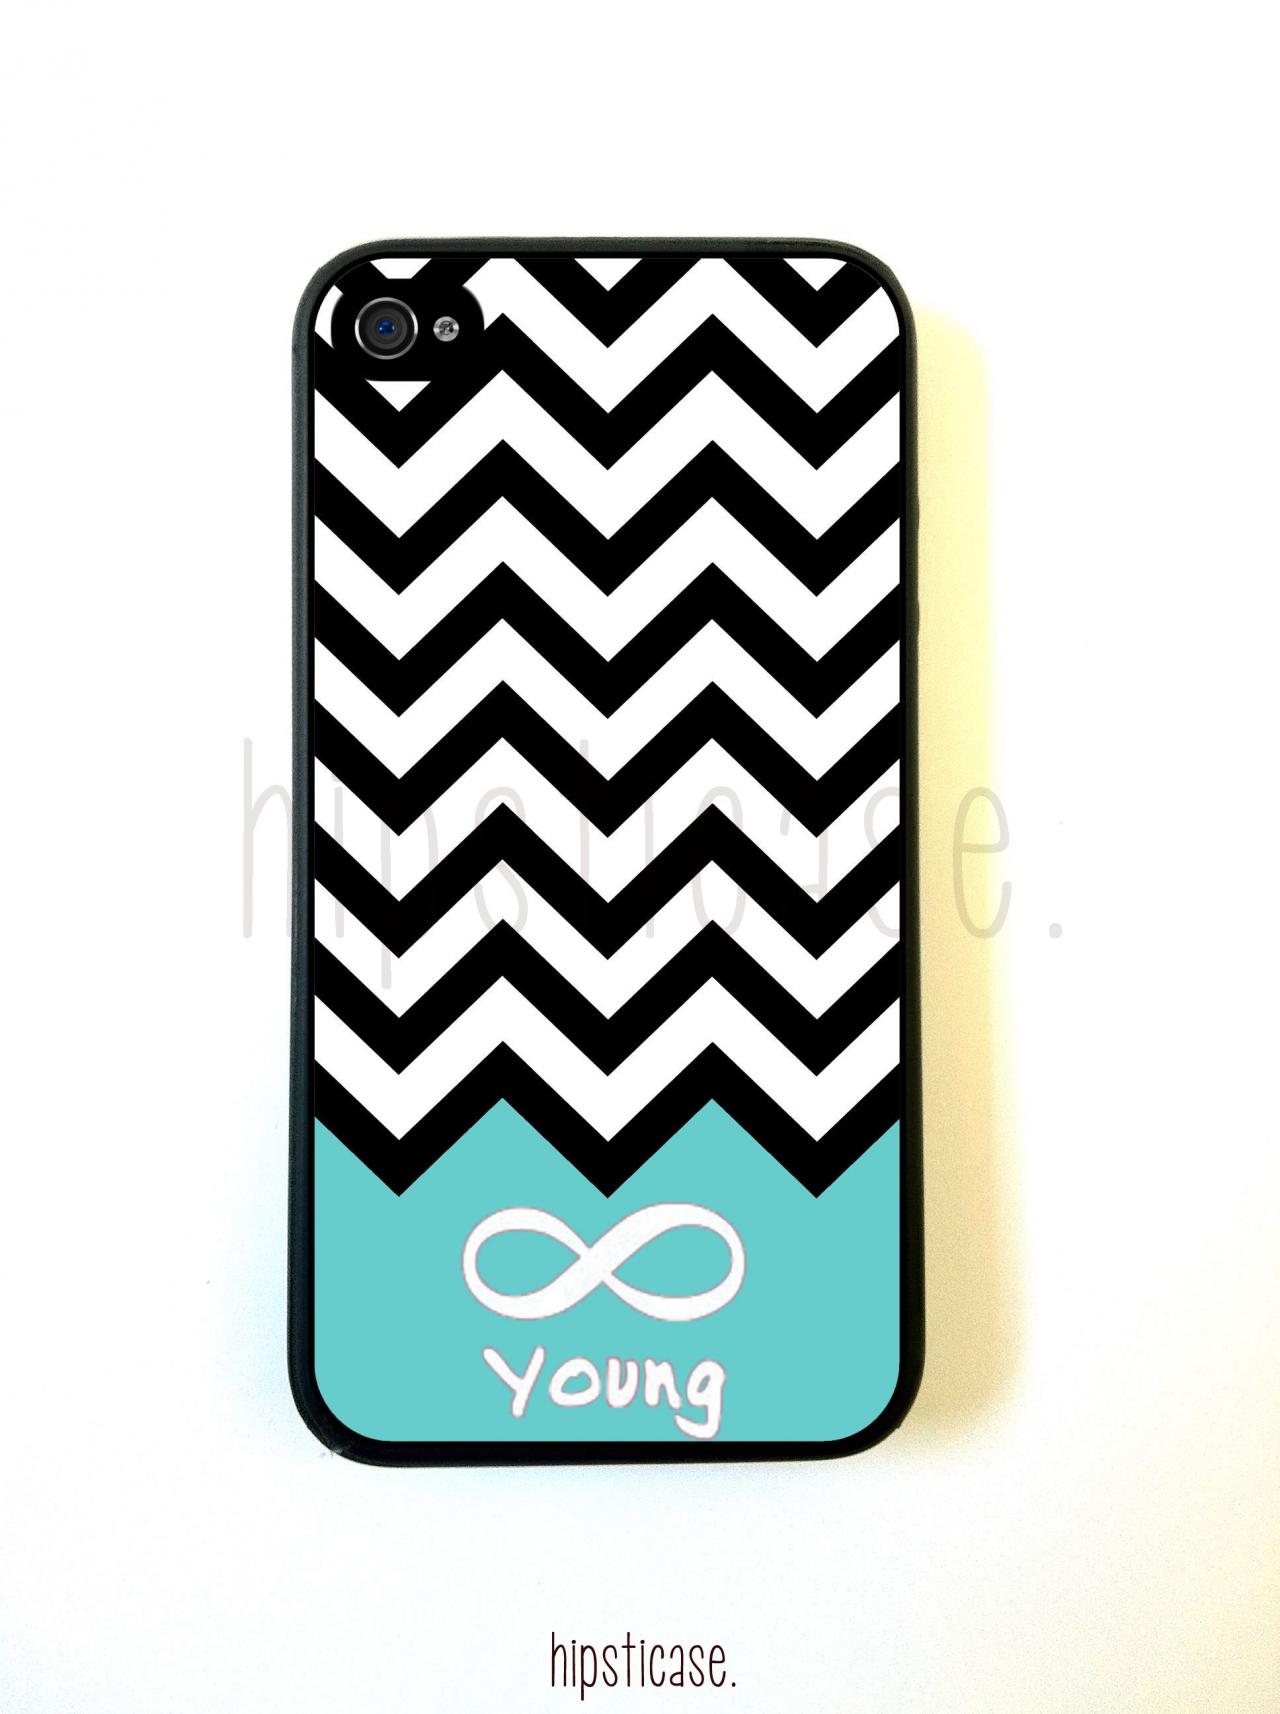 Forever Young Chevron Teal Iphone 5 Case - For Iphone 5/5g - Designer Tpu Case Verizon At&t Sprint